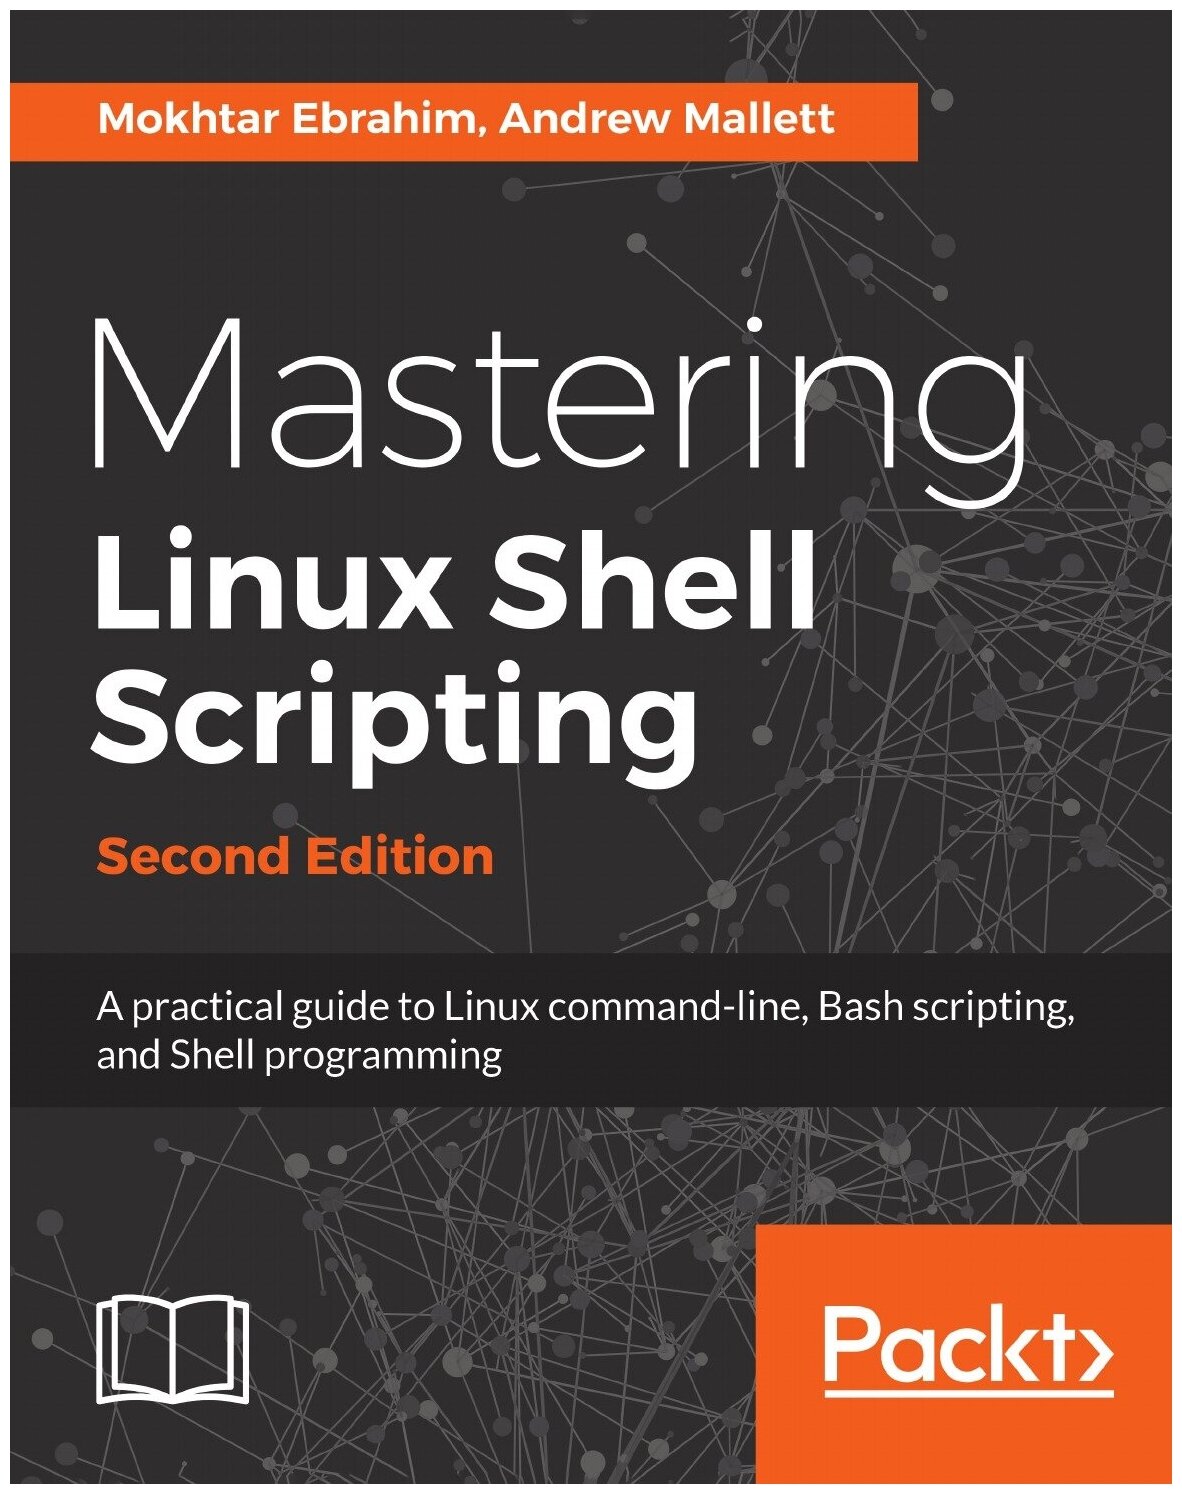 Mastering Linux Shell Scripting - Second Edition. A practical guide to Linux command-line, Bash scripting, and Shell programming